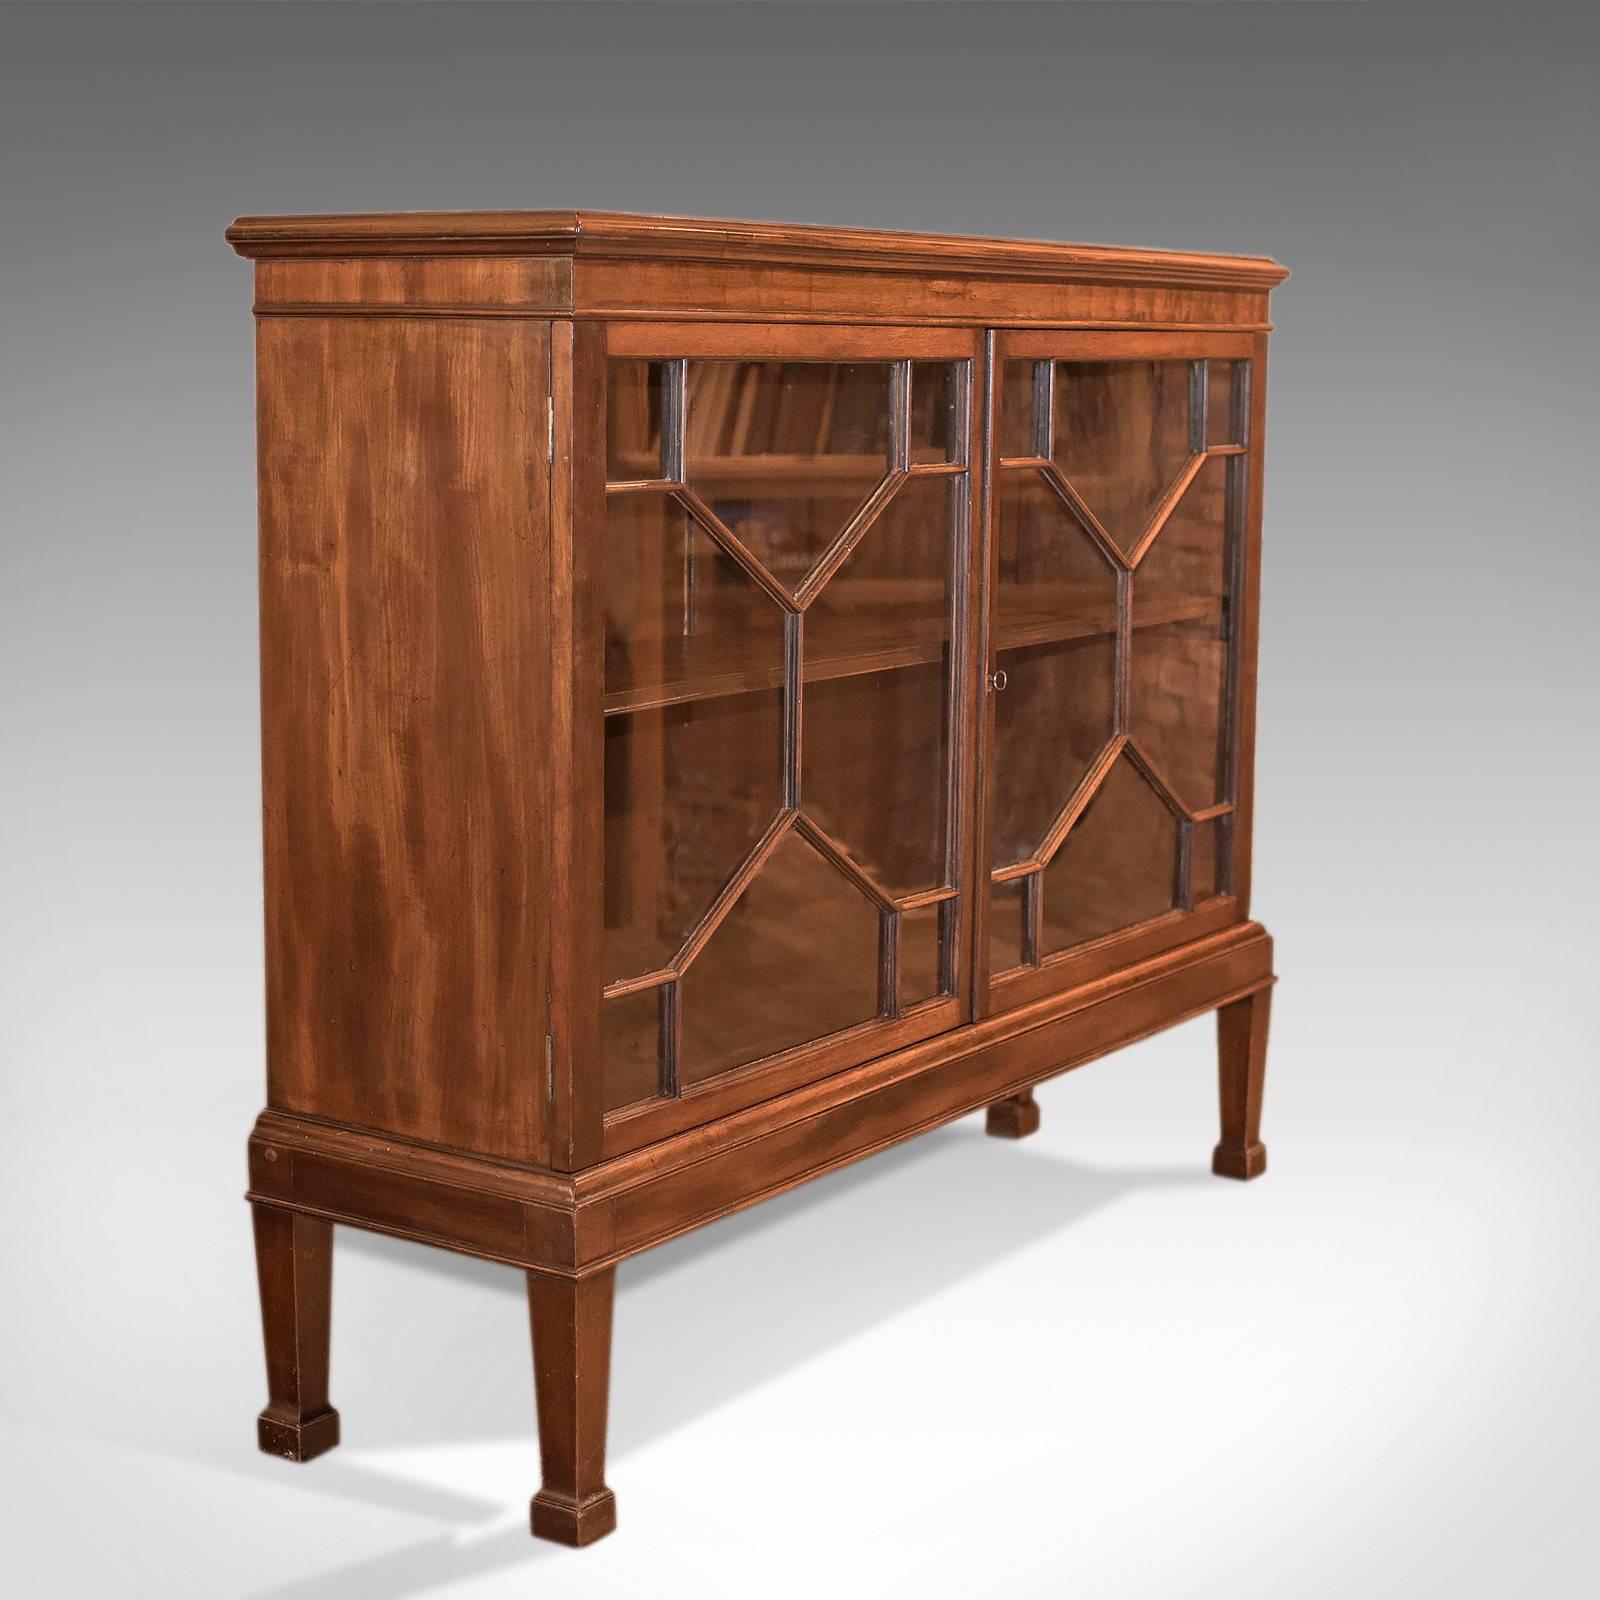 Displaying excellent proportion, this is an antique glazed bookcase dating to the late Victorian period circa 1880.

Crafted in fine, generous cuts of walnut
Displaying good colour and grain interest
The top with moulded edge detail
Upper